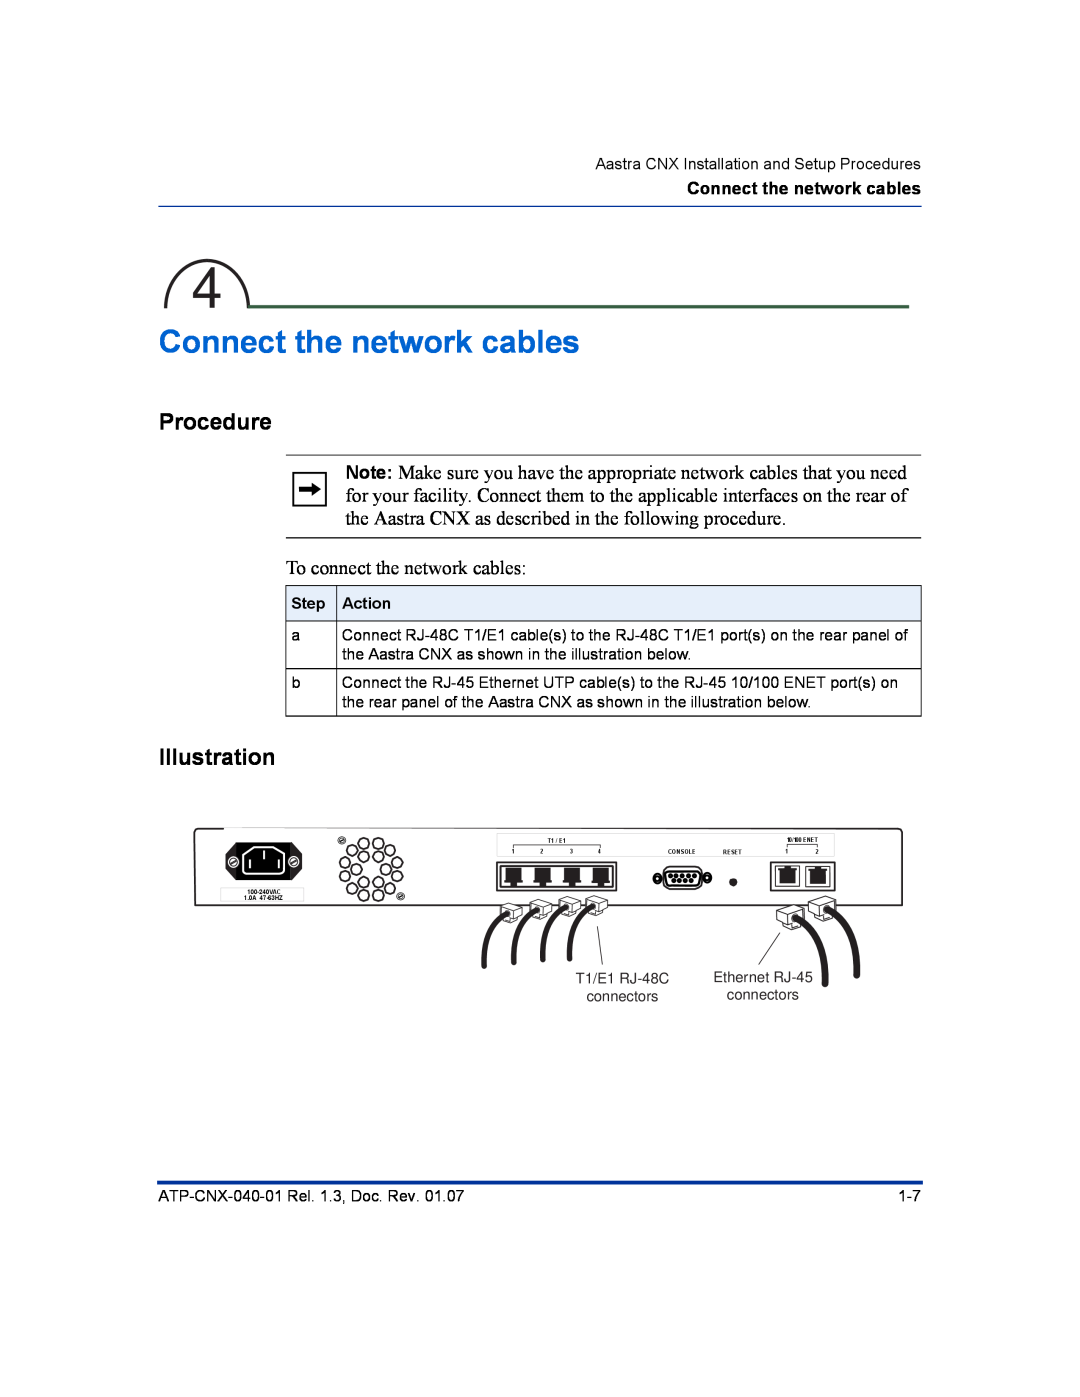 Aastra Telecom ATP-CNX-040-01 manual Connect the network cables, Procedure, Illustration, Step Action 